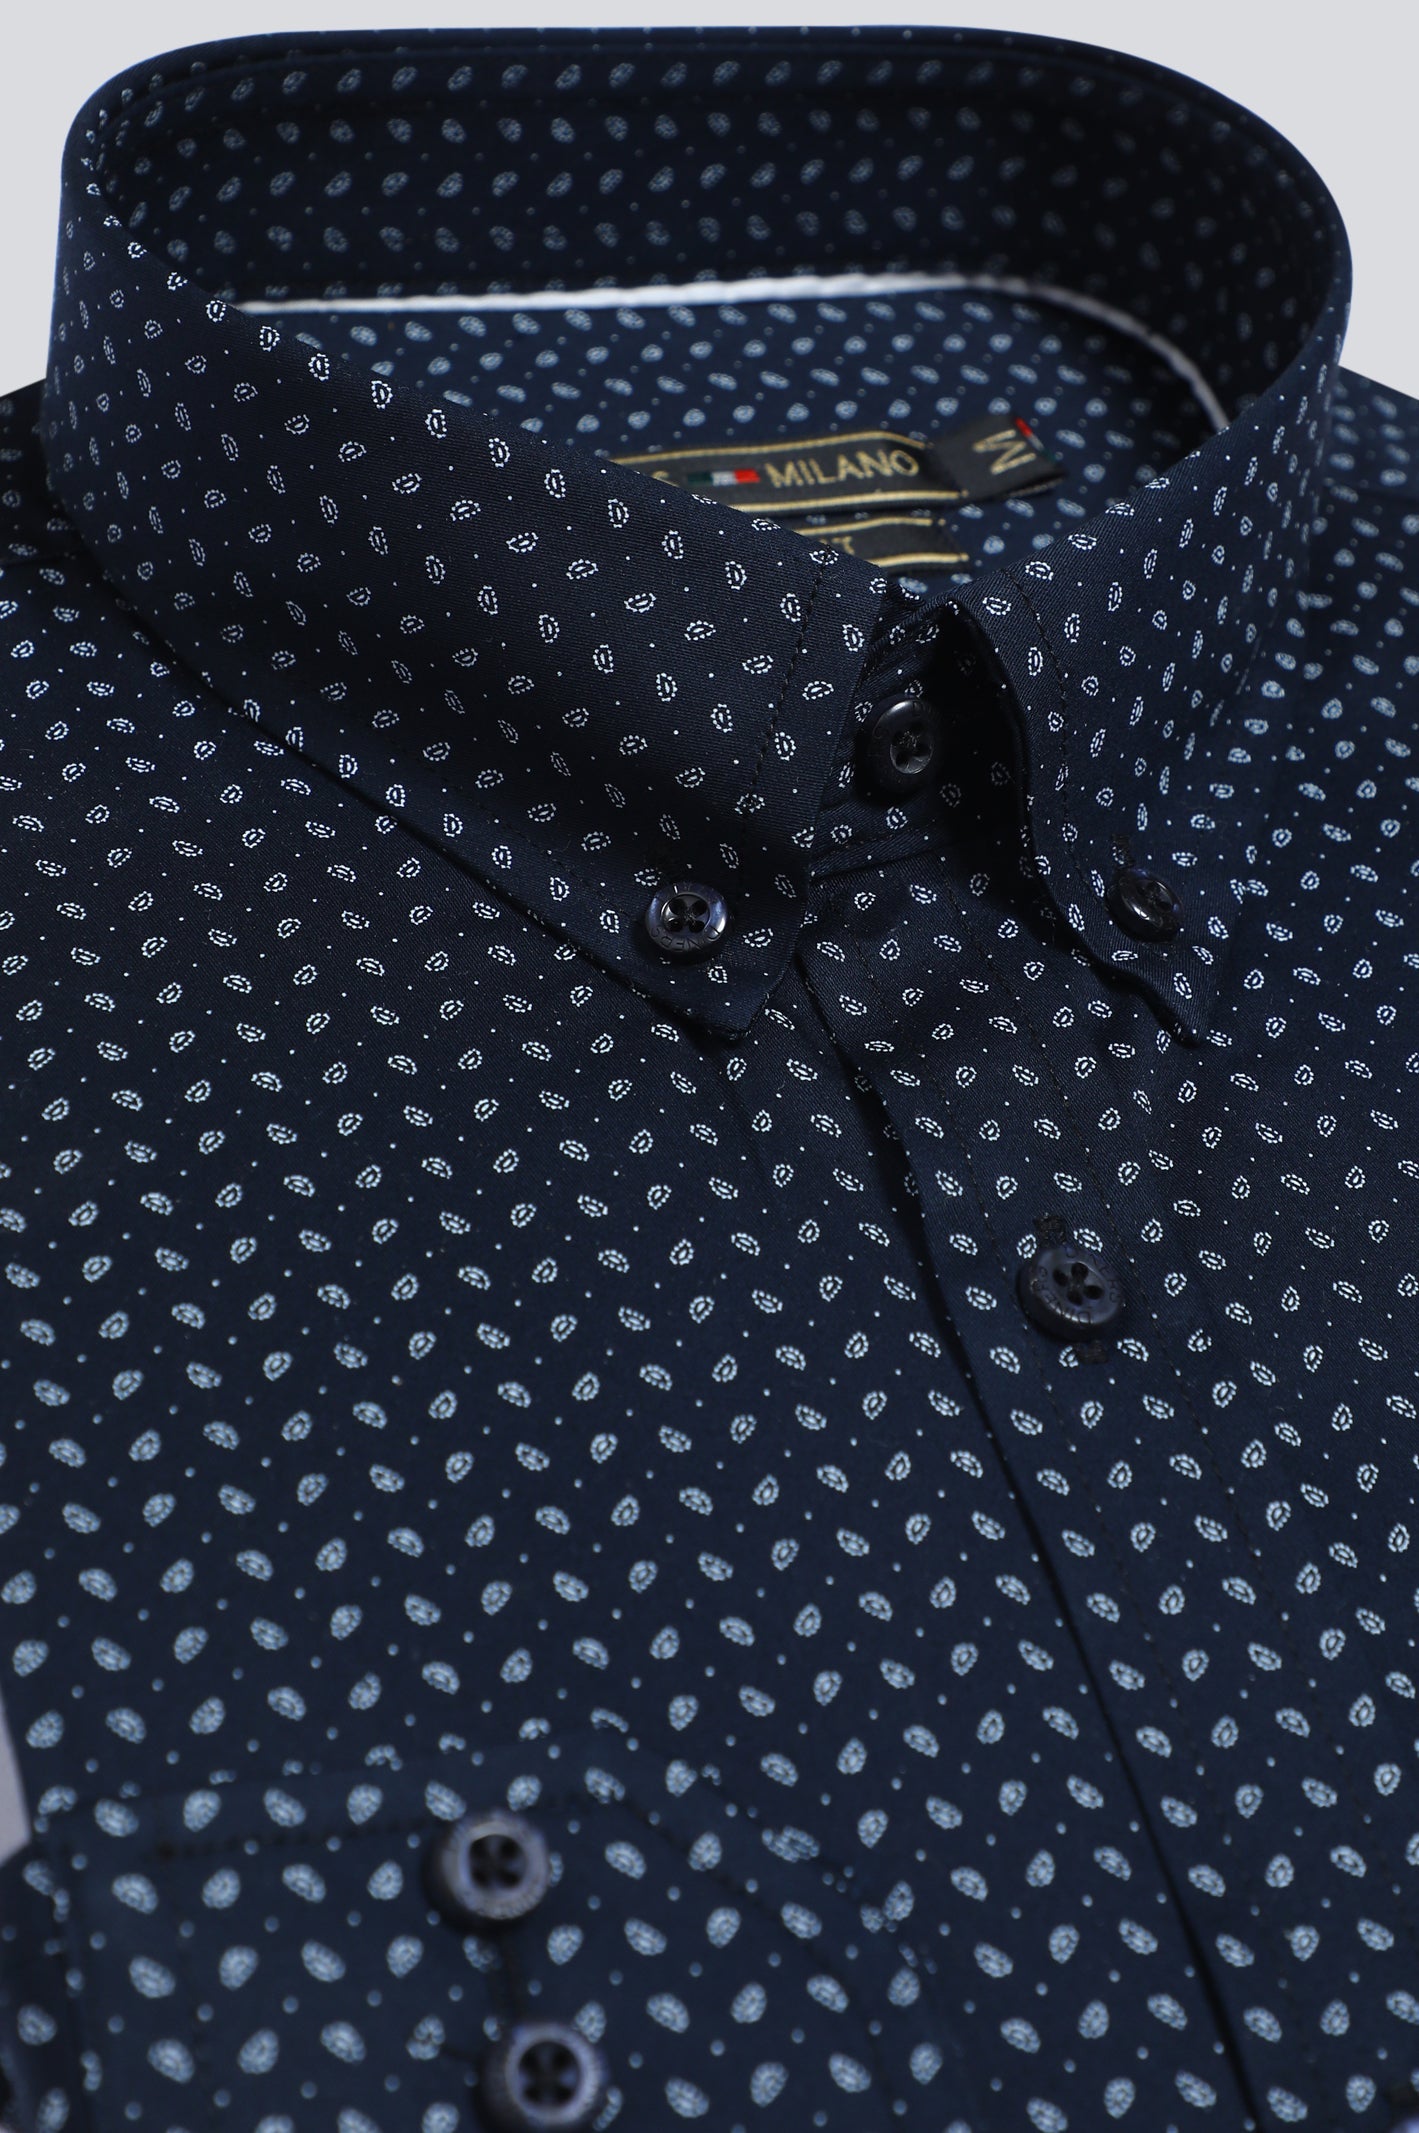 Casual Milano Shirt for Men - Diners